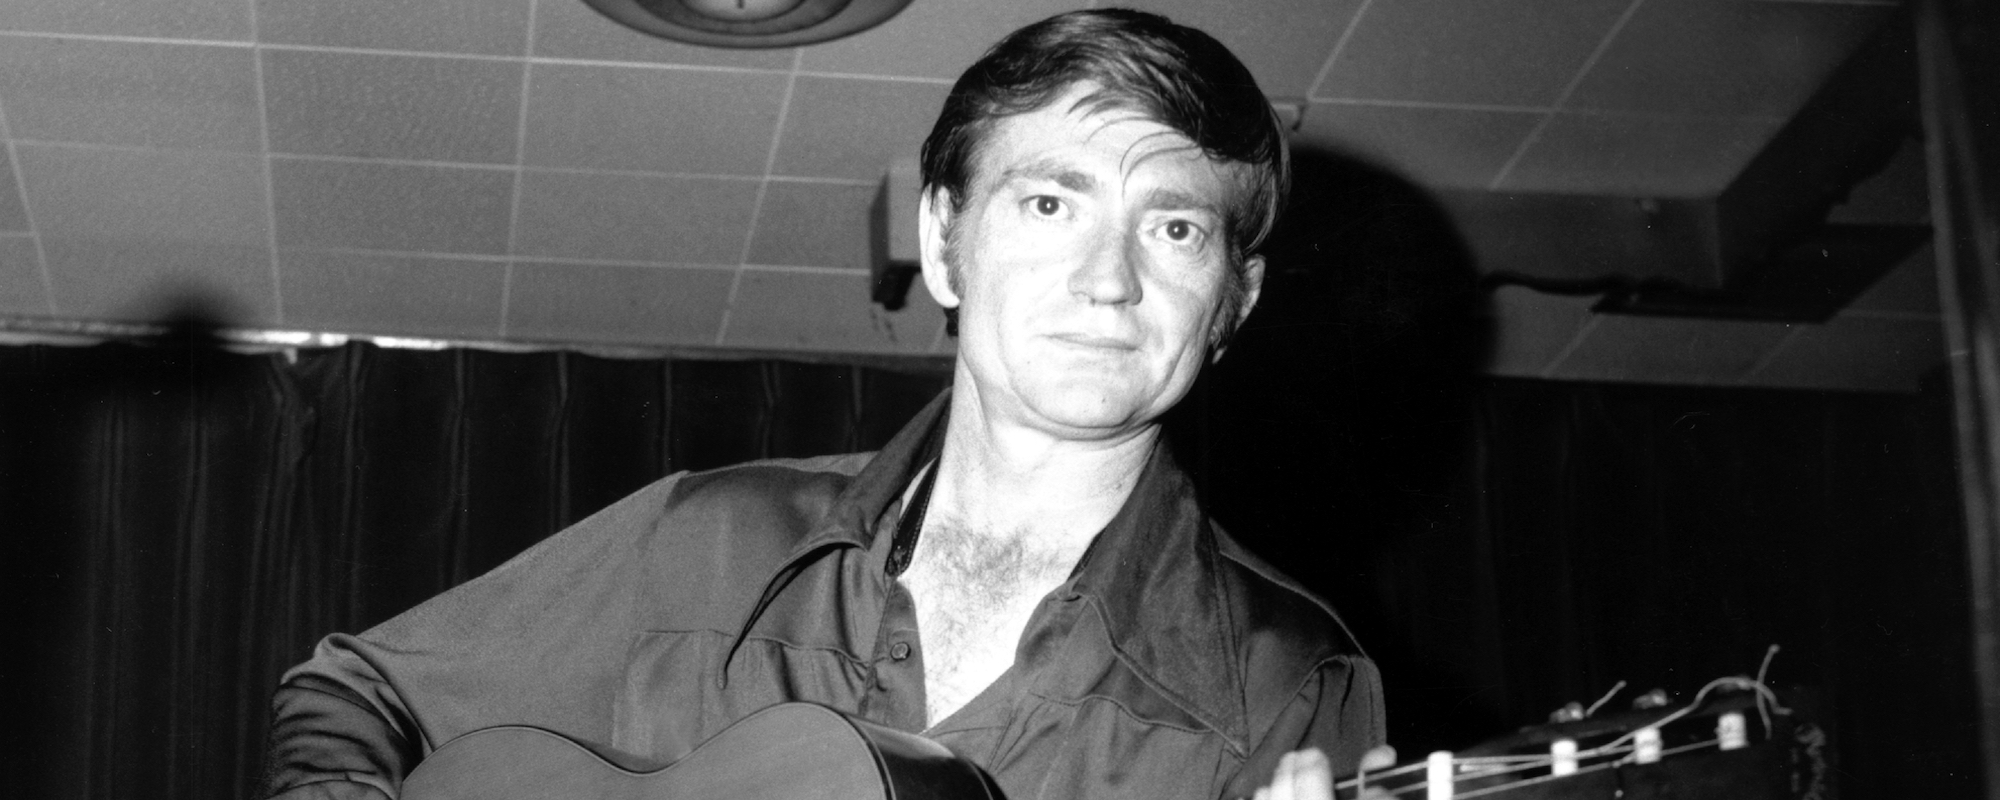 The Song Willie Nelson Wrote the Same Week as “Crazy,” Which Was Eventually Recorded by Elvis Presley: “Funny How Time Slips Away”